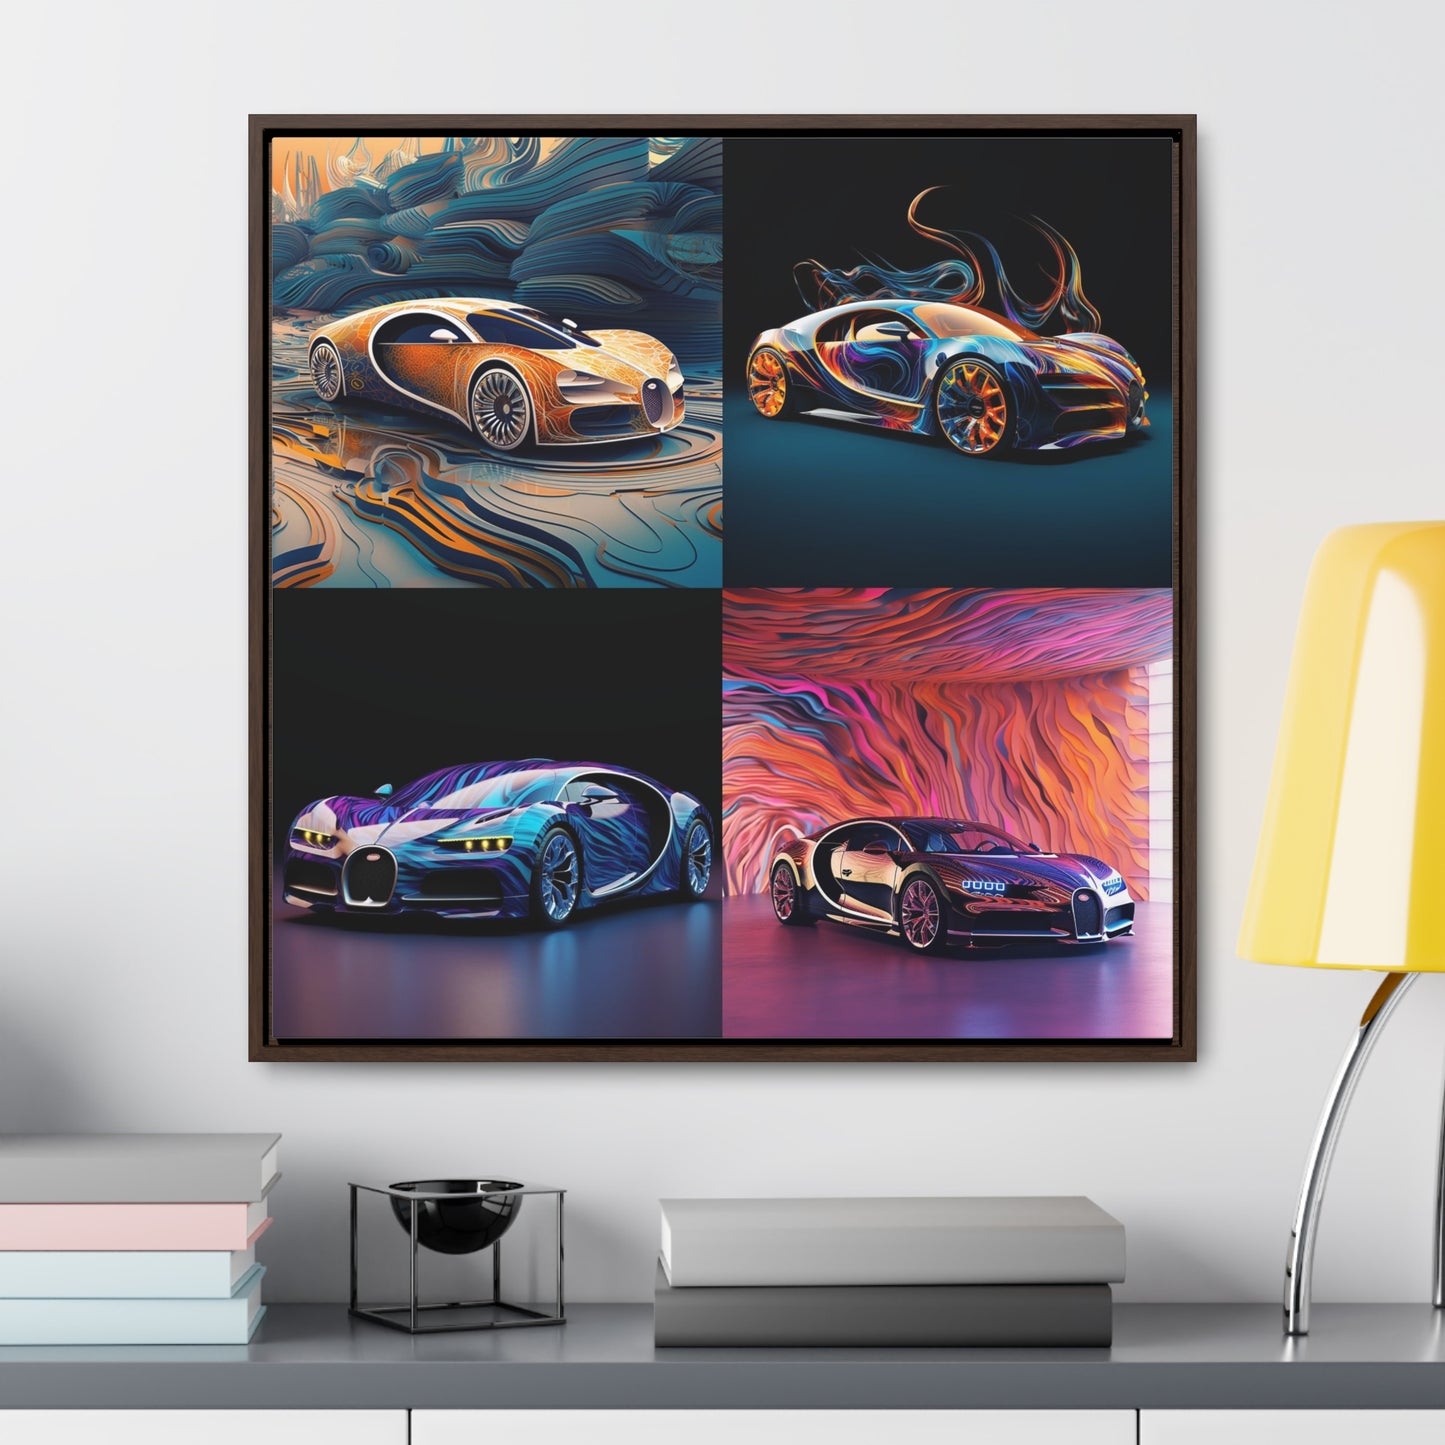 Gallery Canvas Wraps, Square Frame Bugatti Abstract Flair 5